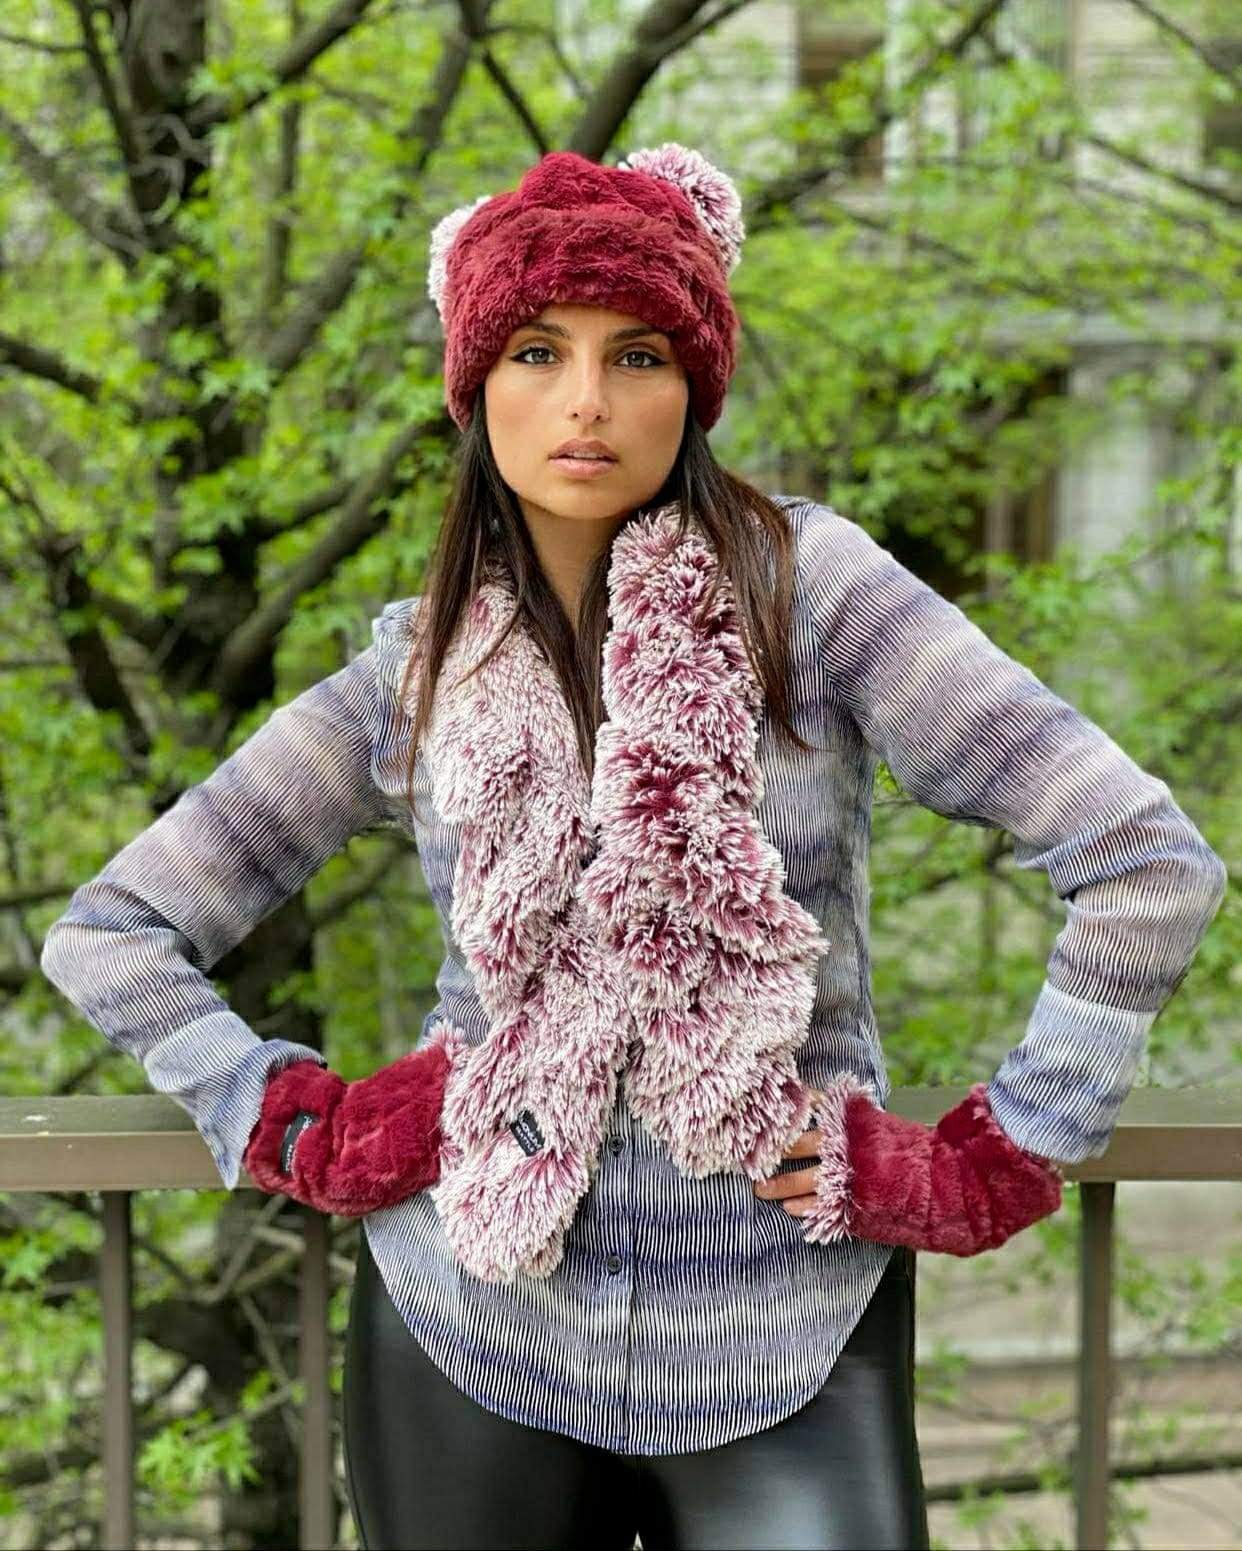 Pandemonium Millinery Tri-Color Scarf with Pockets - Pearl Fox / Cuddly Gray / Savannah Cat in Gray